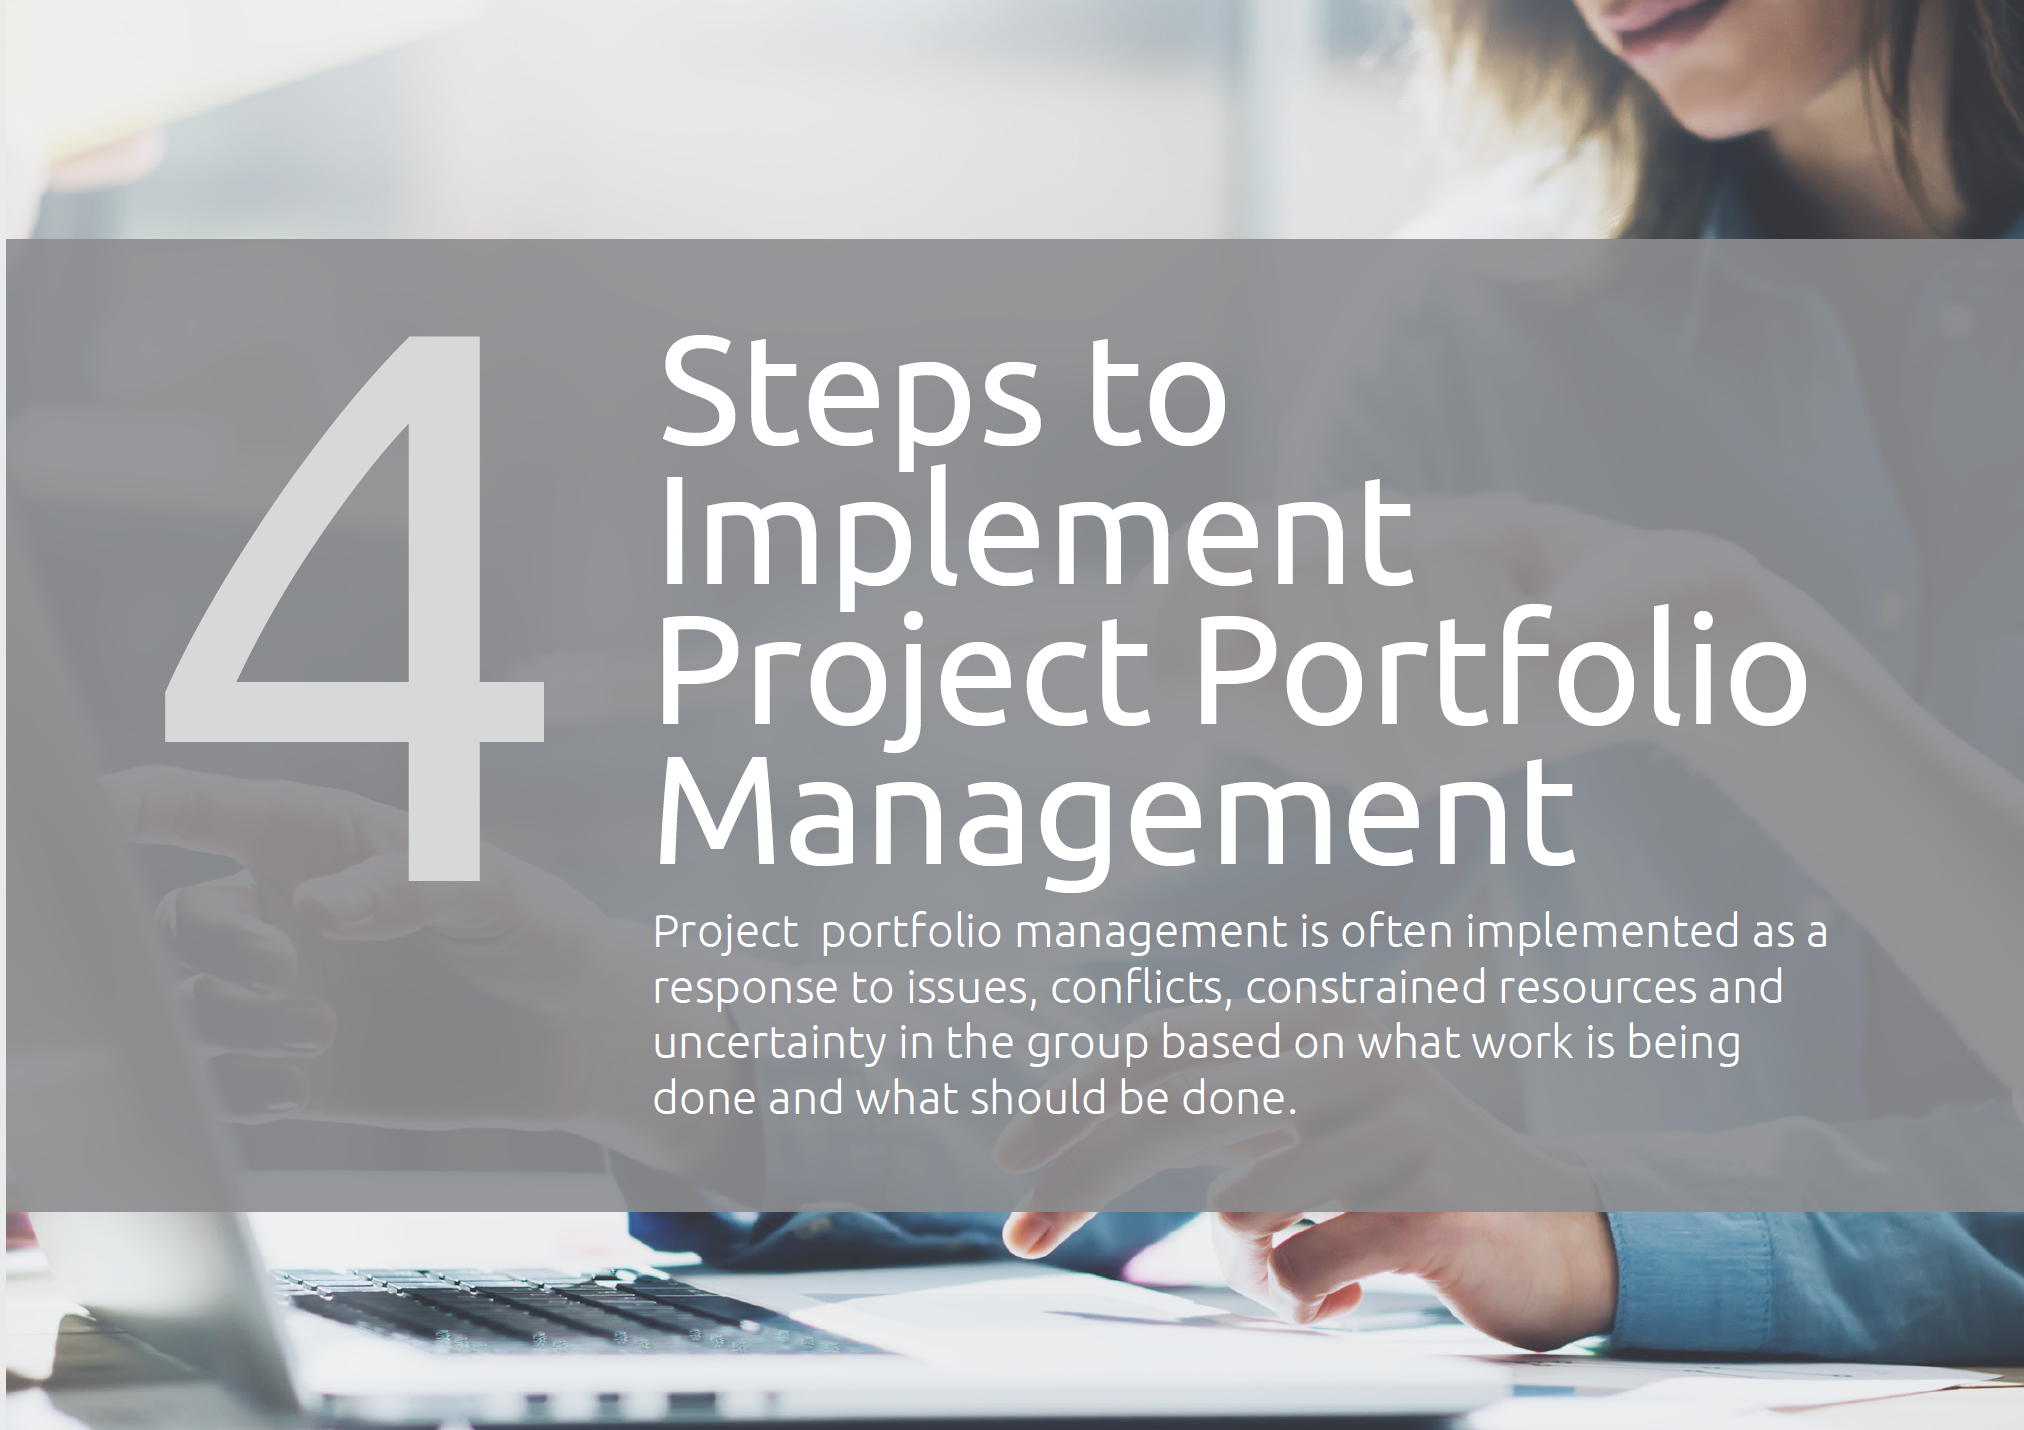 4 Steps to Implementing Project Portfolio Management [Infographic]